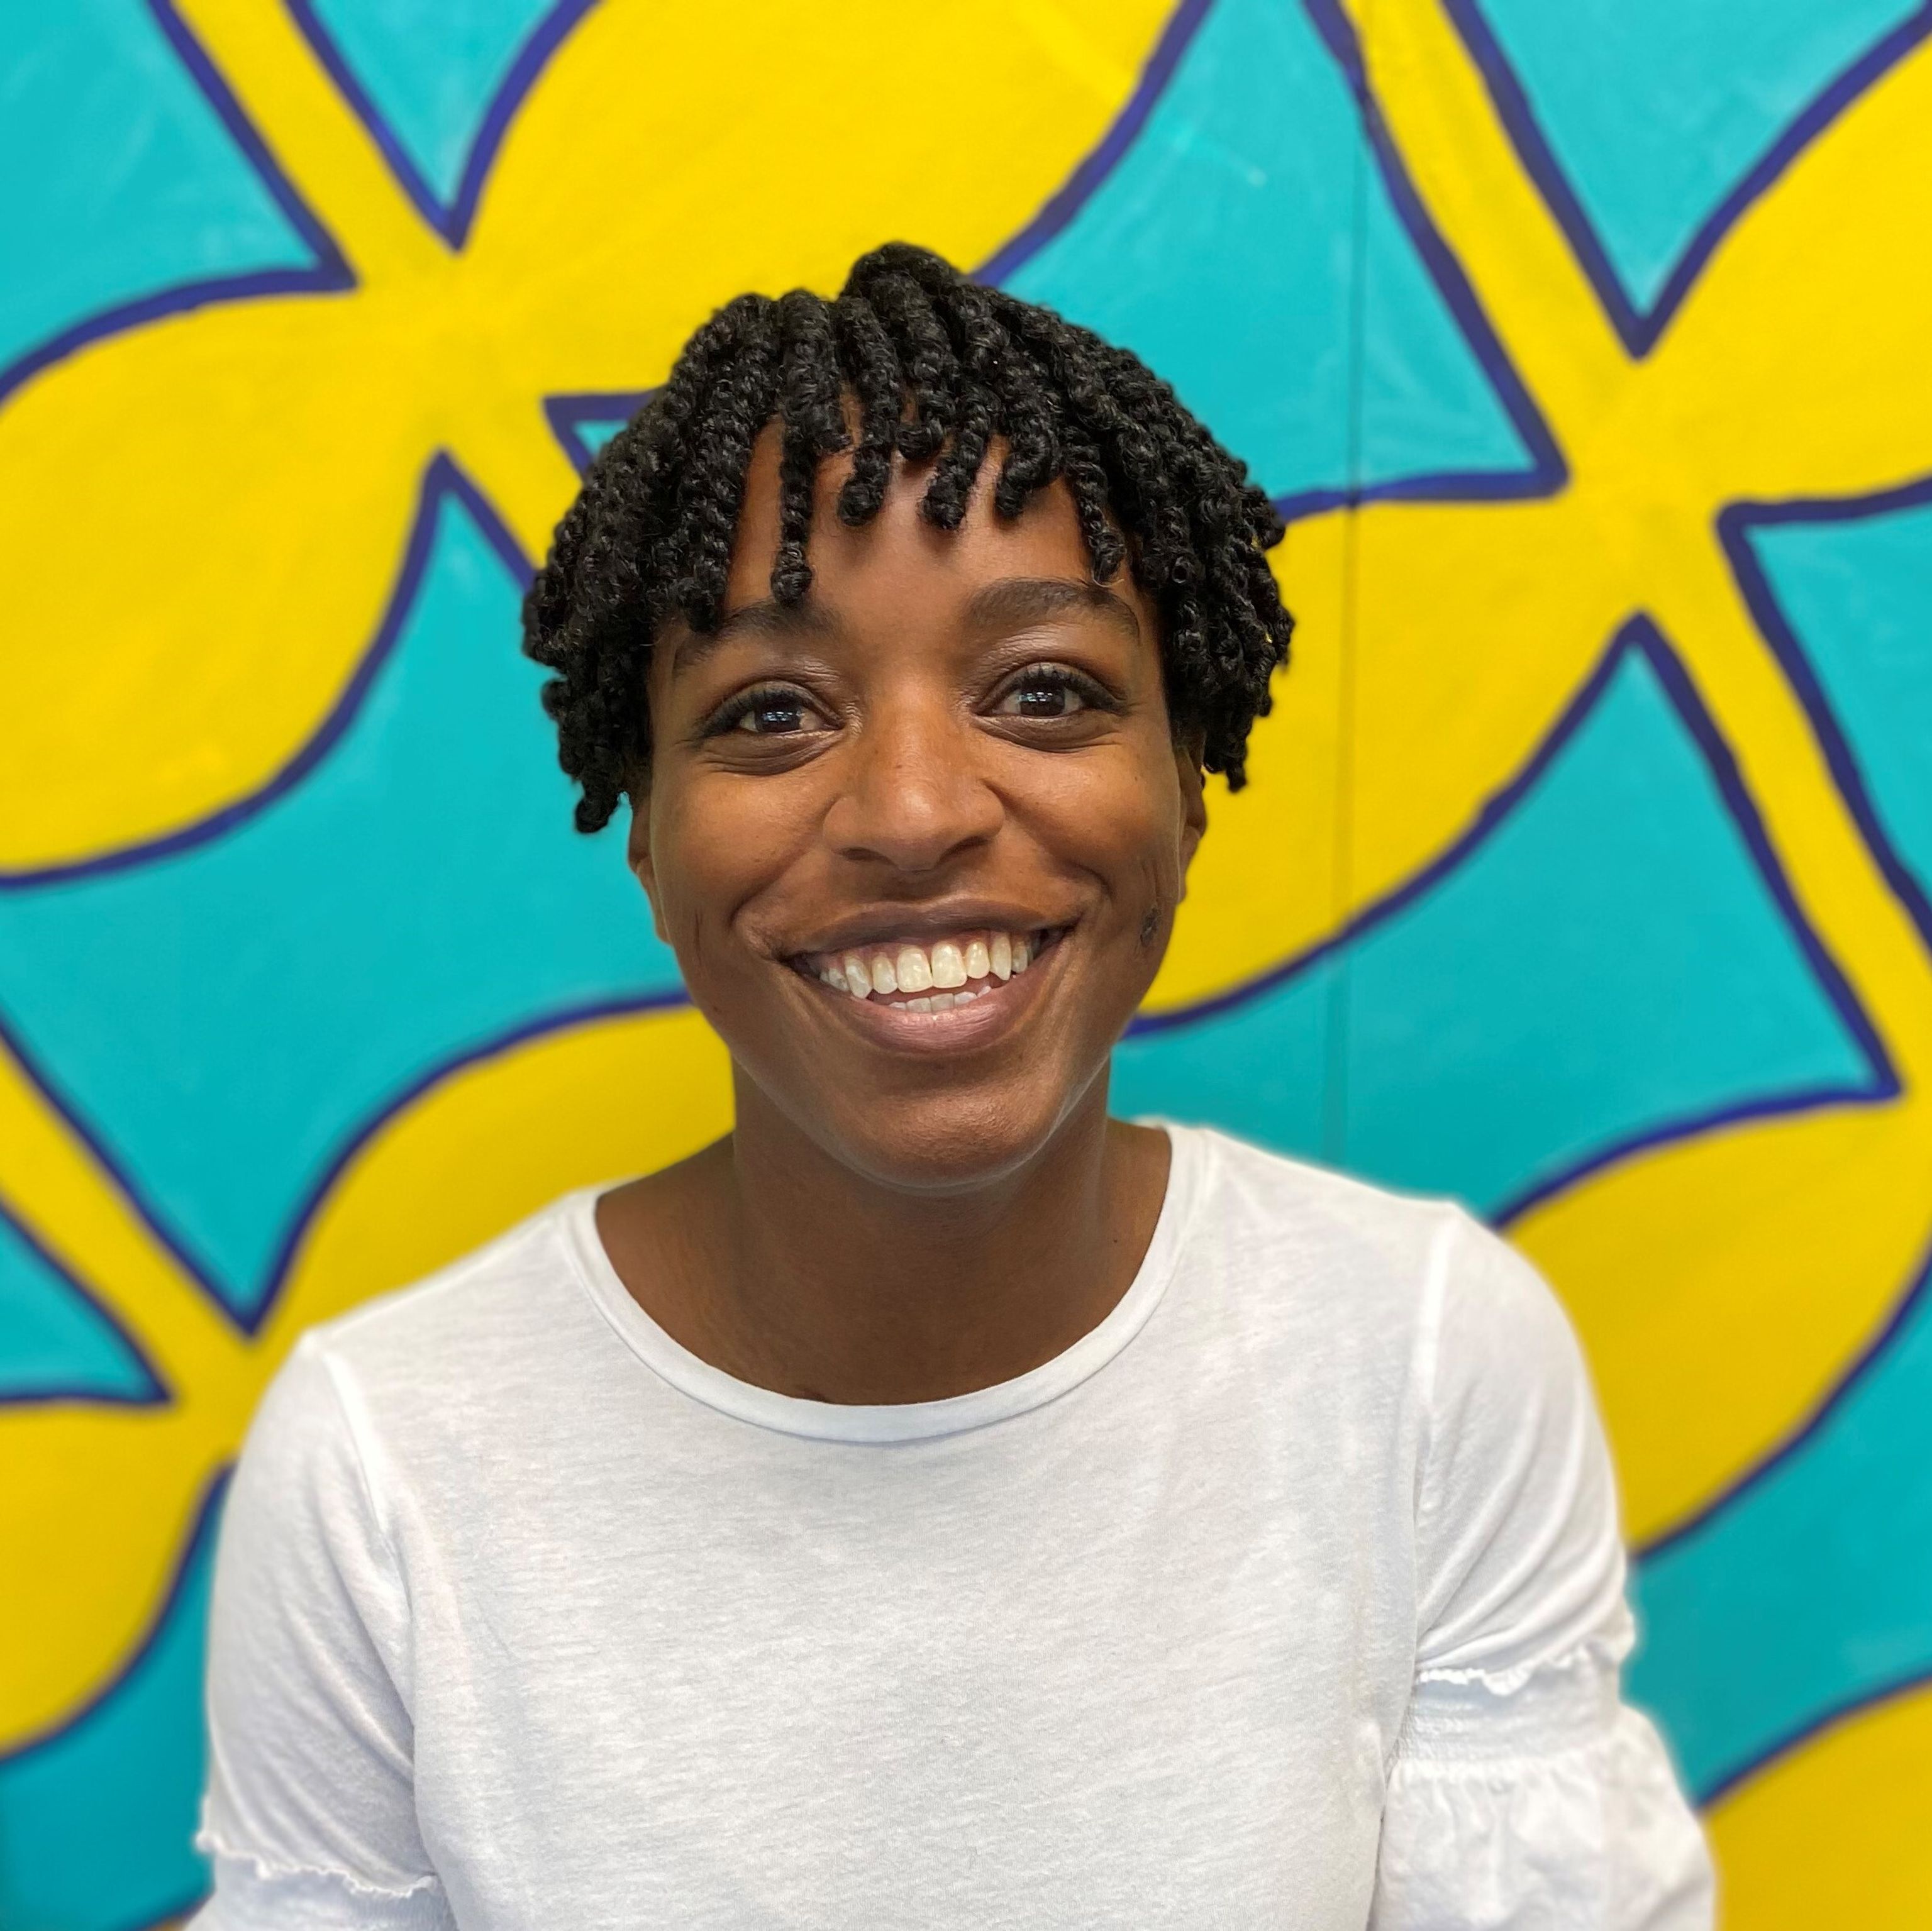 Bettina Hilliard smiling in front of brightly colored background